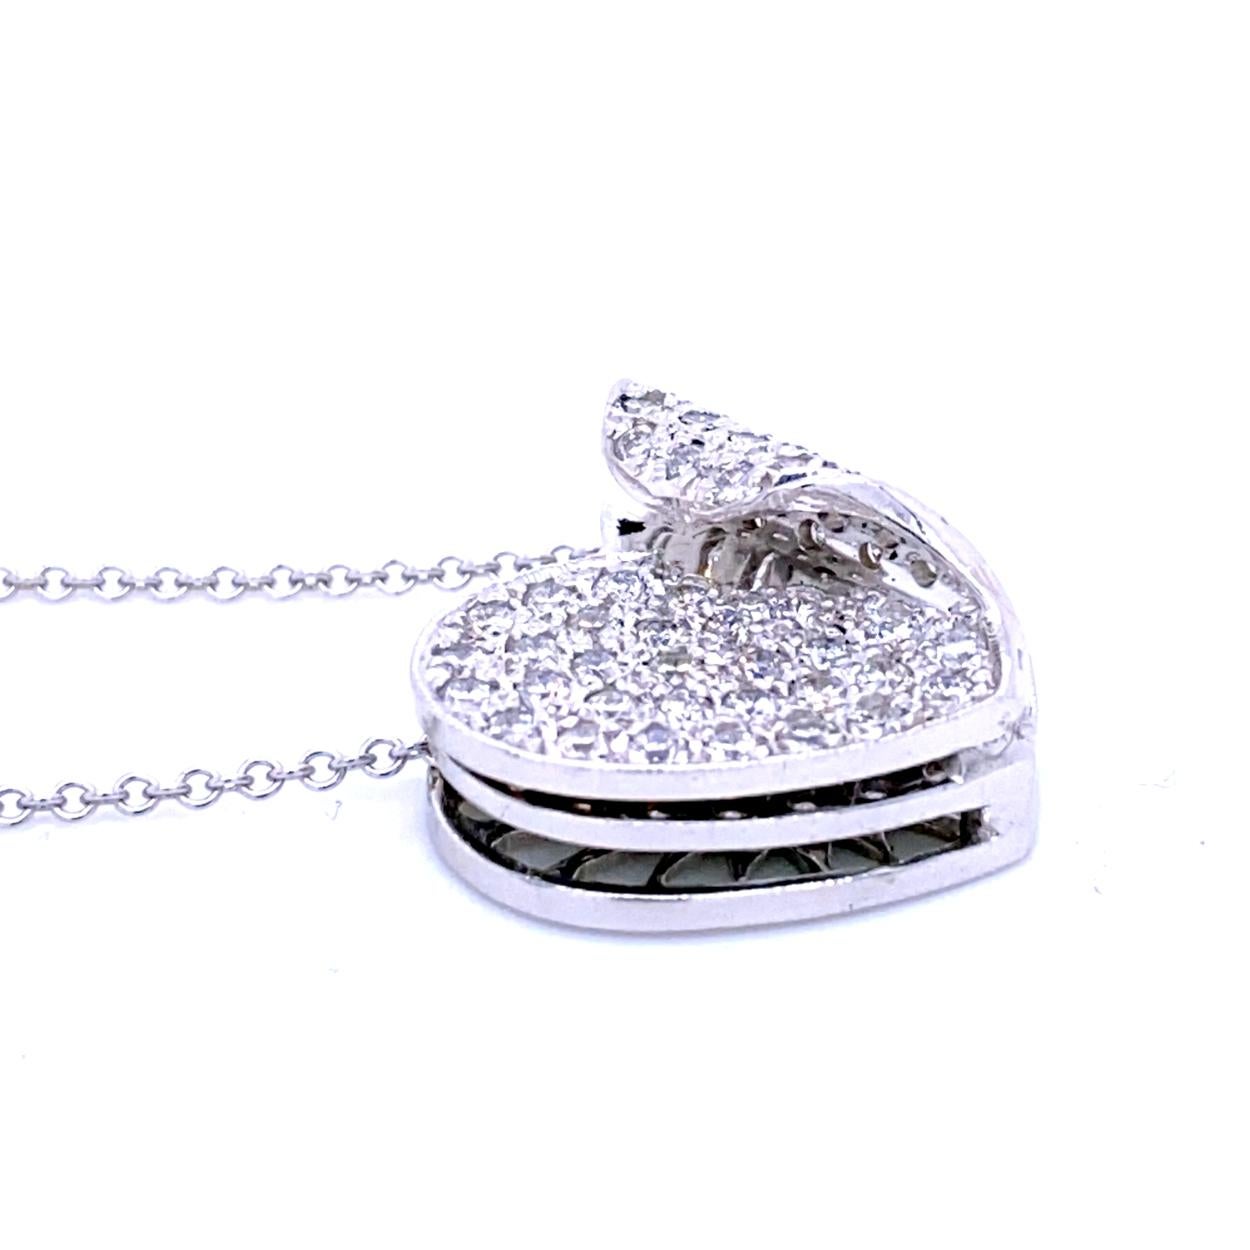 1.11 Carat Pave Set Diamond 14 Karat Gold Heart Pendant Necklace In New Condition For Sale In Los Angeles, CA